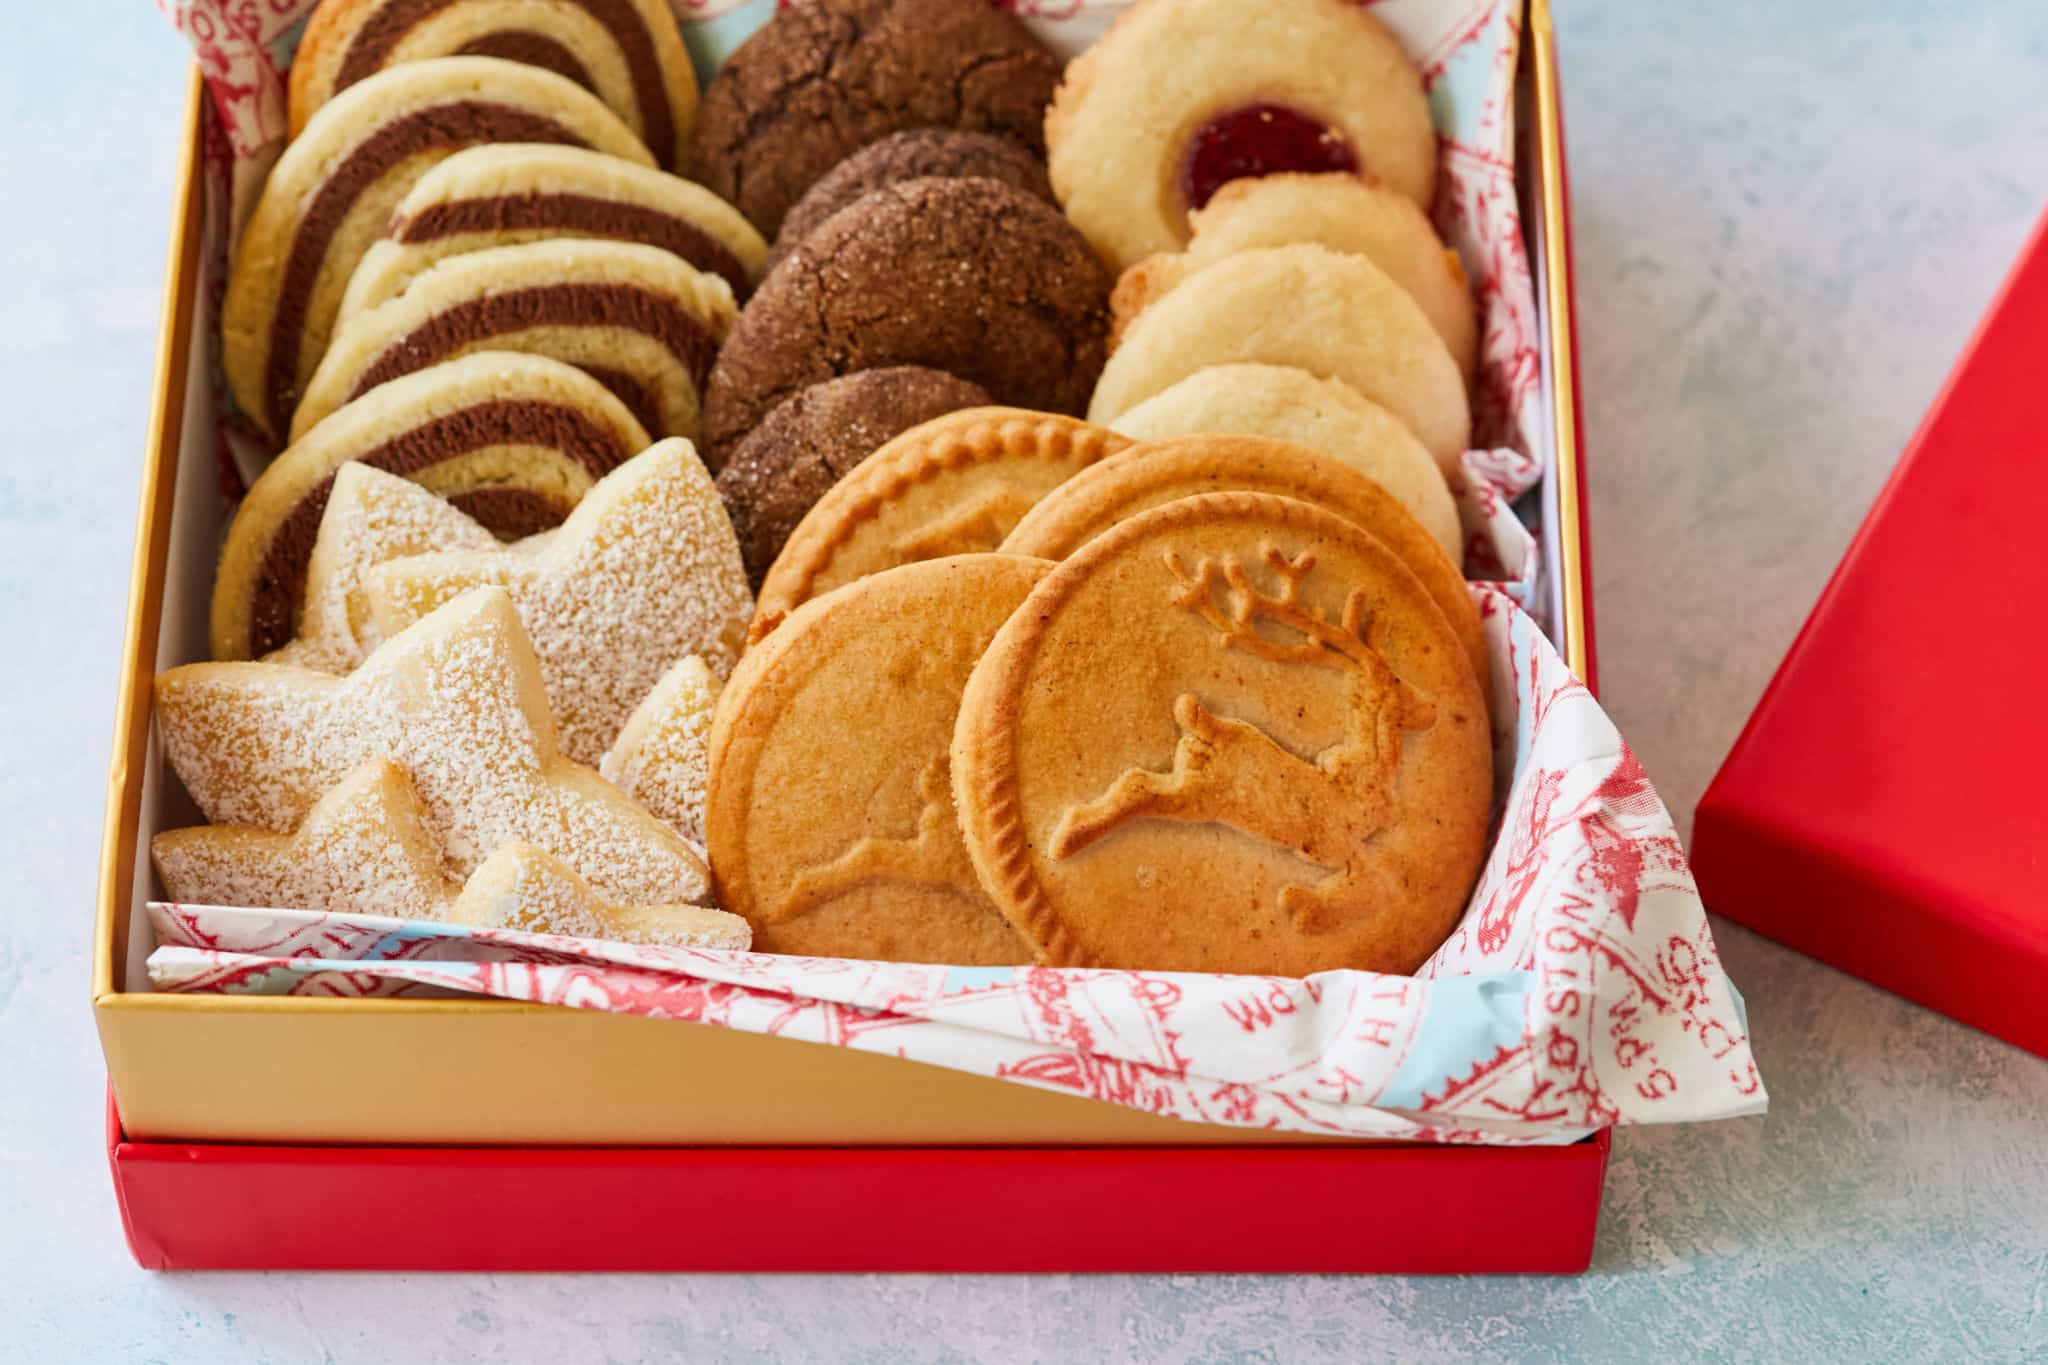 A box of cookies ready for shipping.